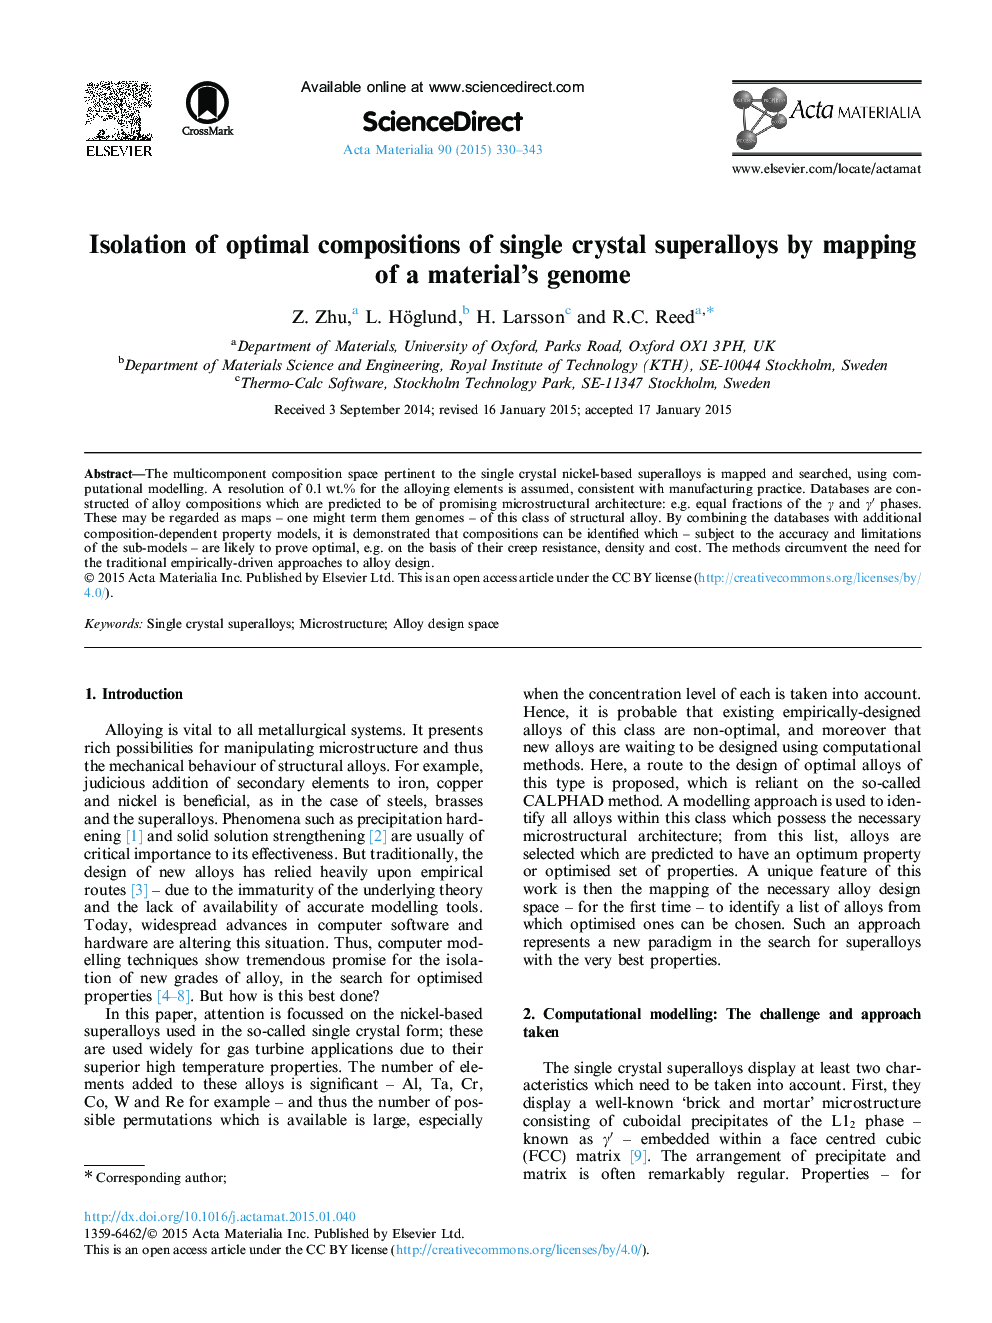 Isolation of optimal compositions of single crystal superalloys by mapping of a material's genome